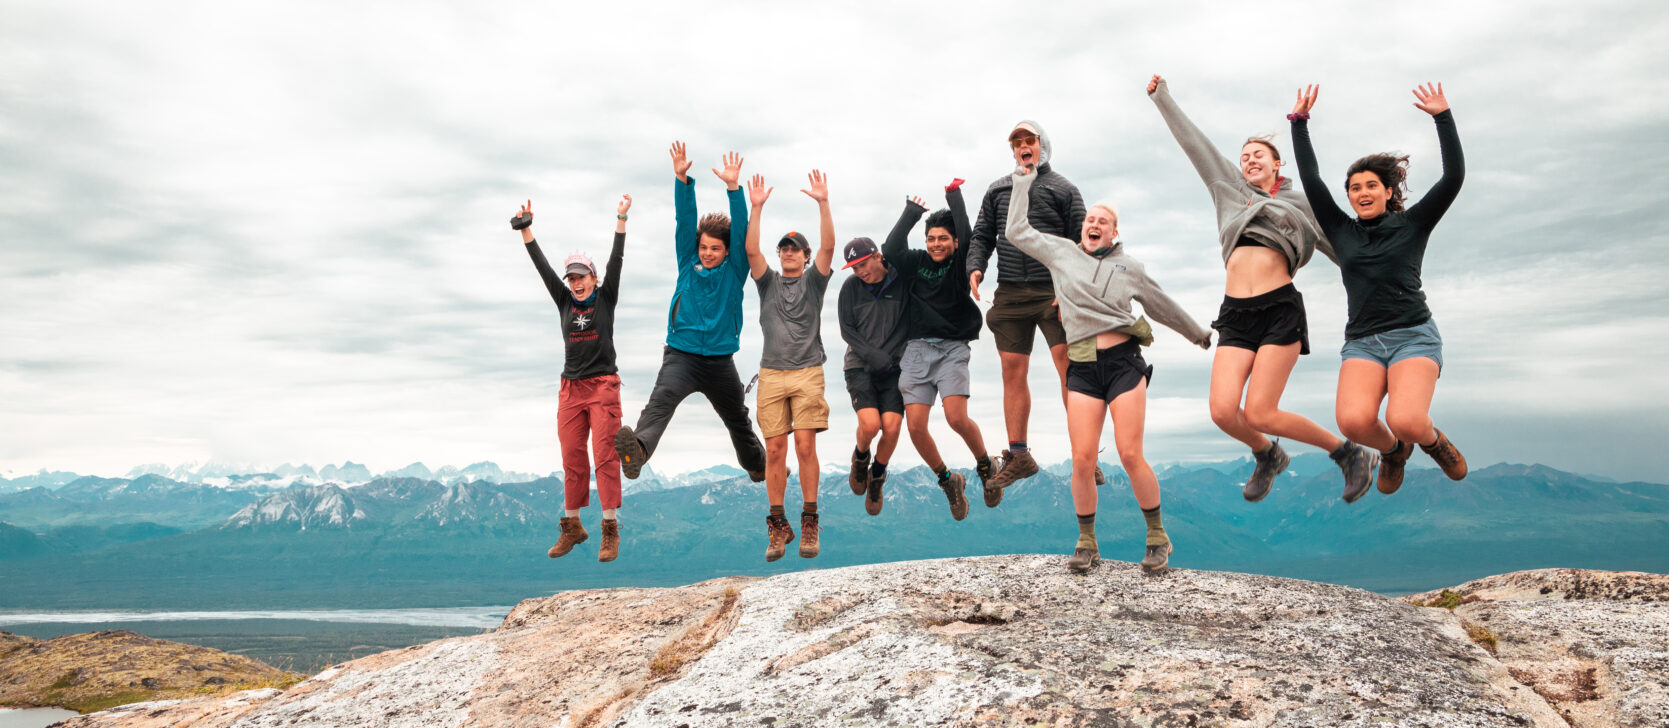 group jumping on a rock with mountains behind